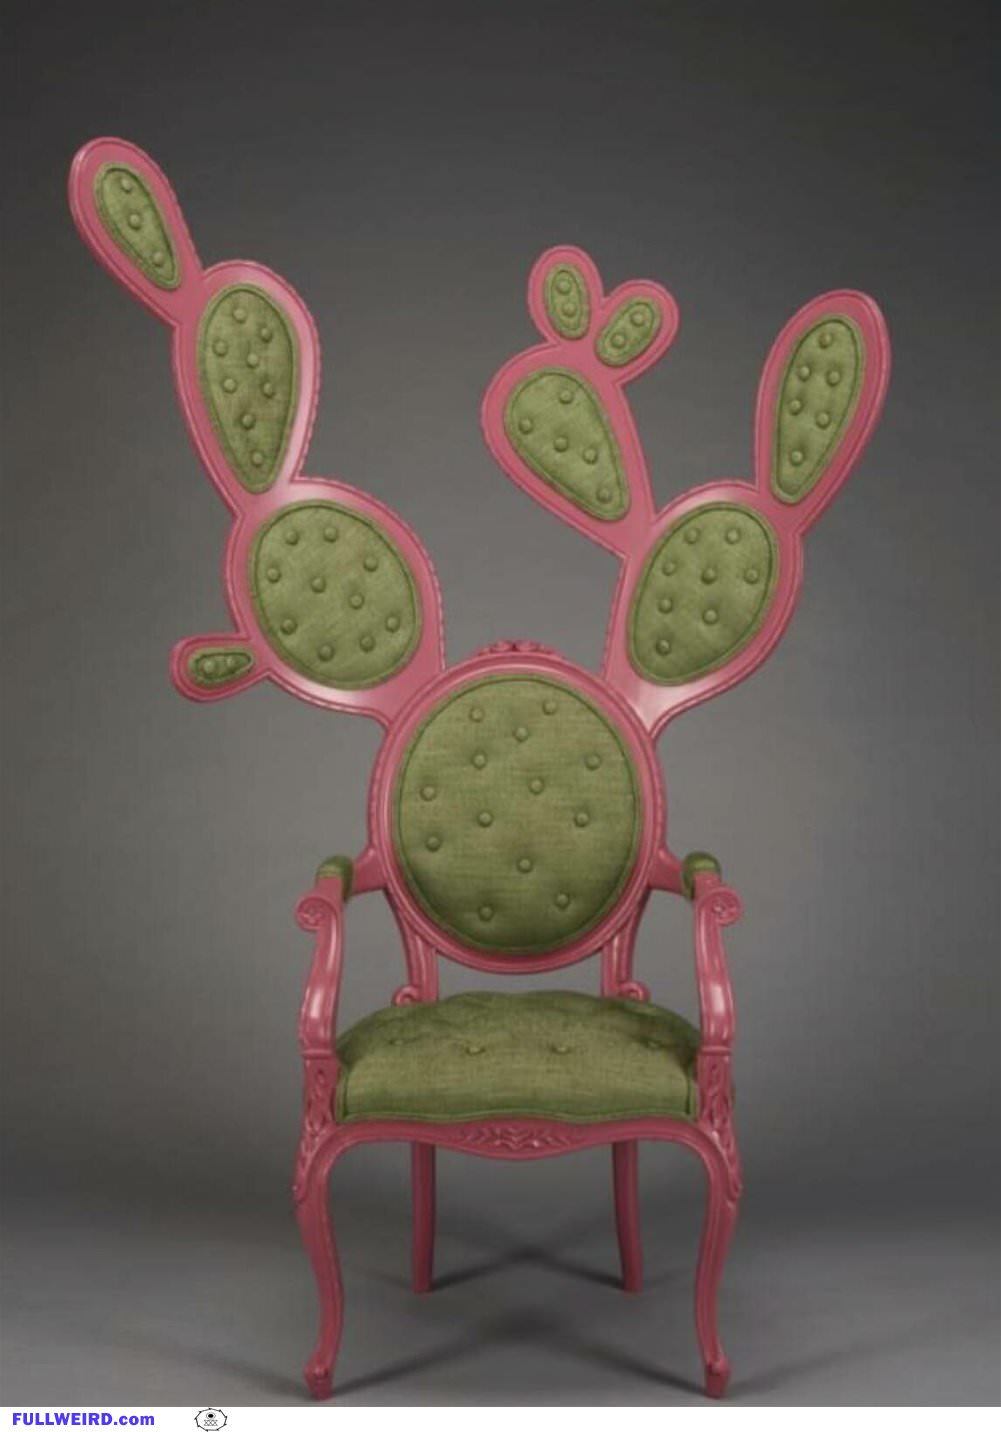 Another Cactus Chair